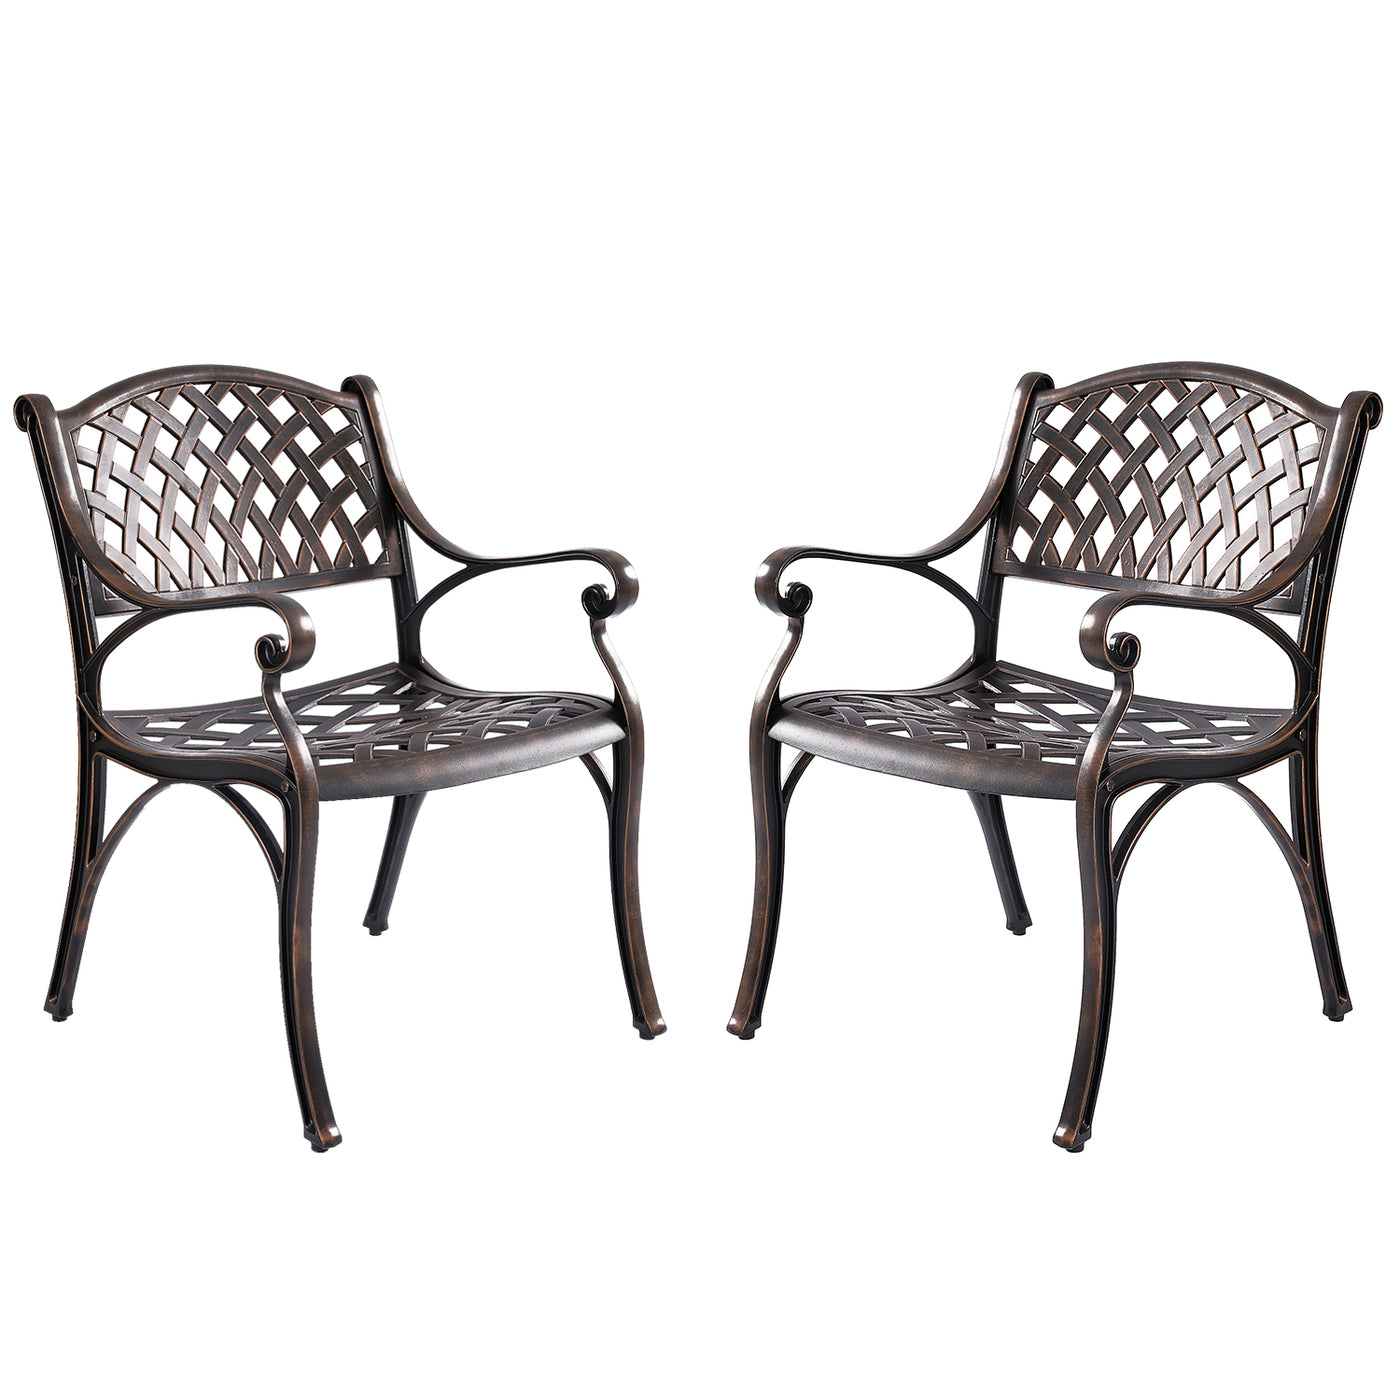 Aiden 2-Piece Outdoor Dining Chair Set for Patio